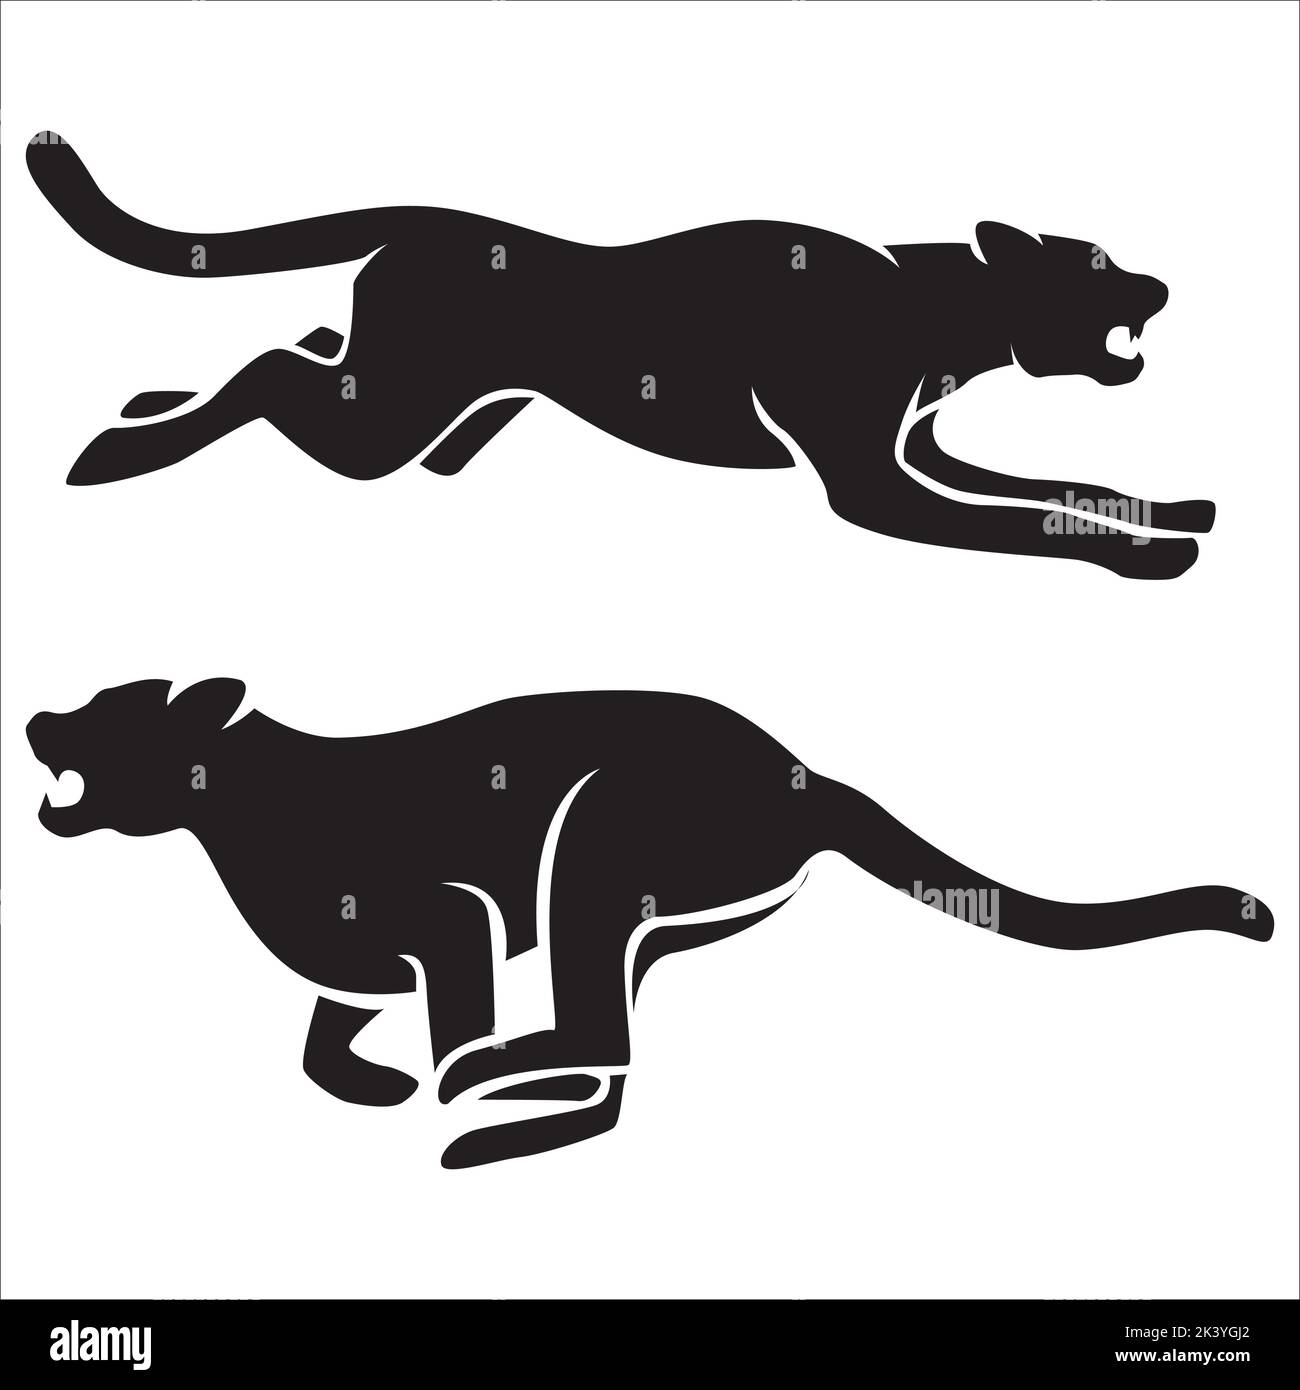 Vector Set Of Tigers Silhouettes Illustration Isolated On White Background Stock Vector Image 